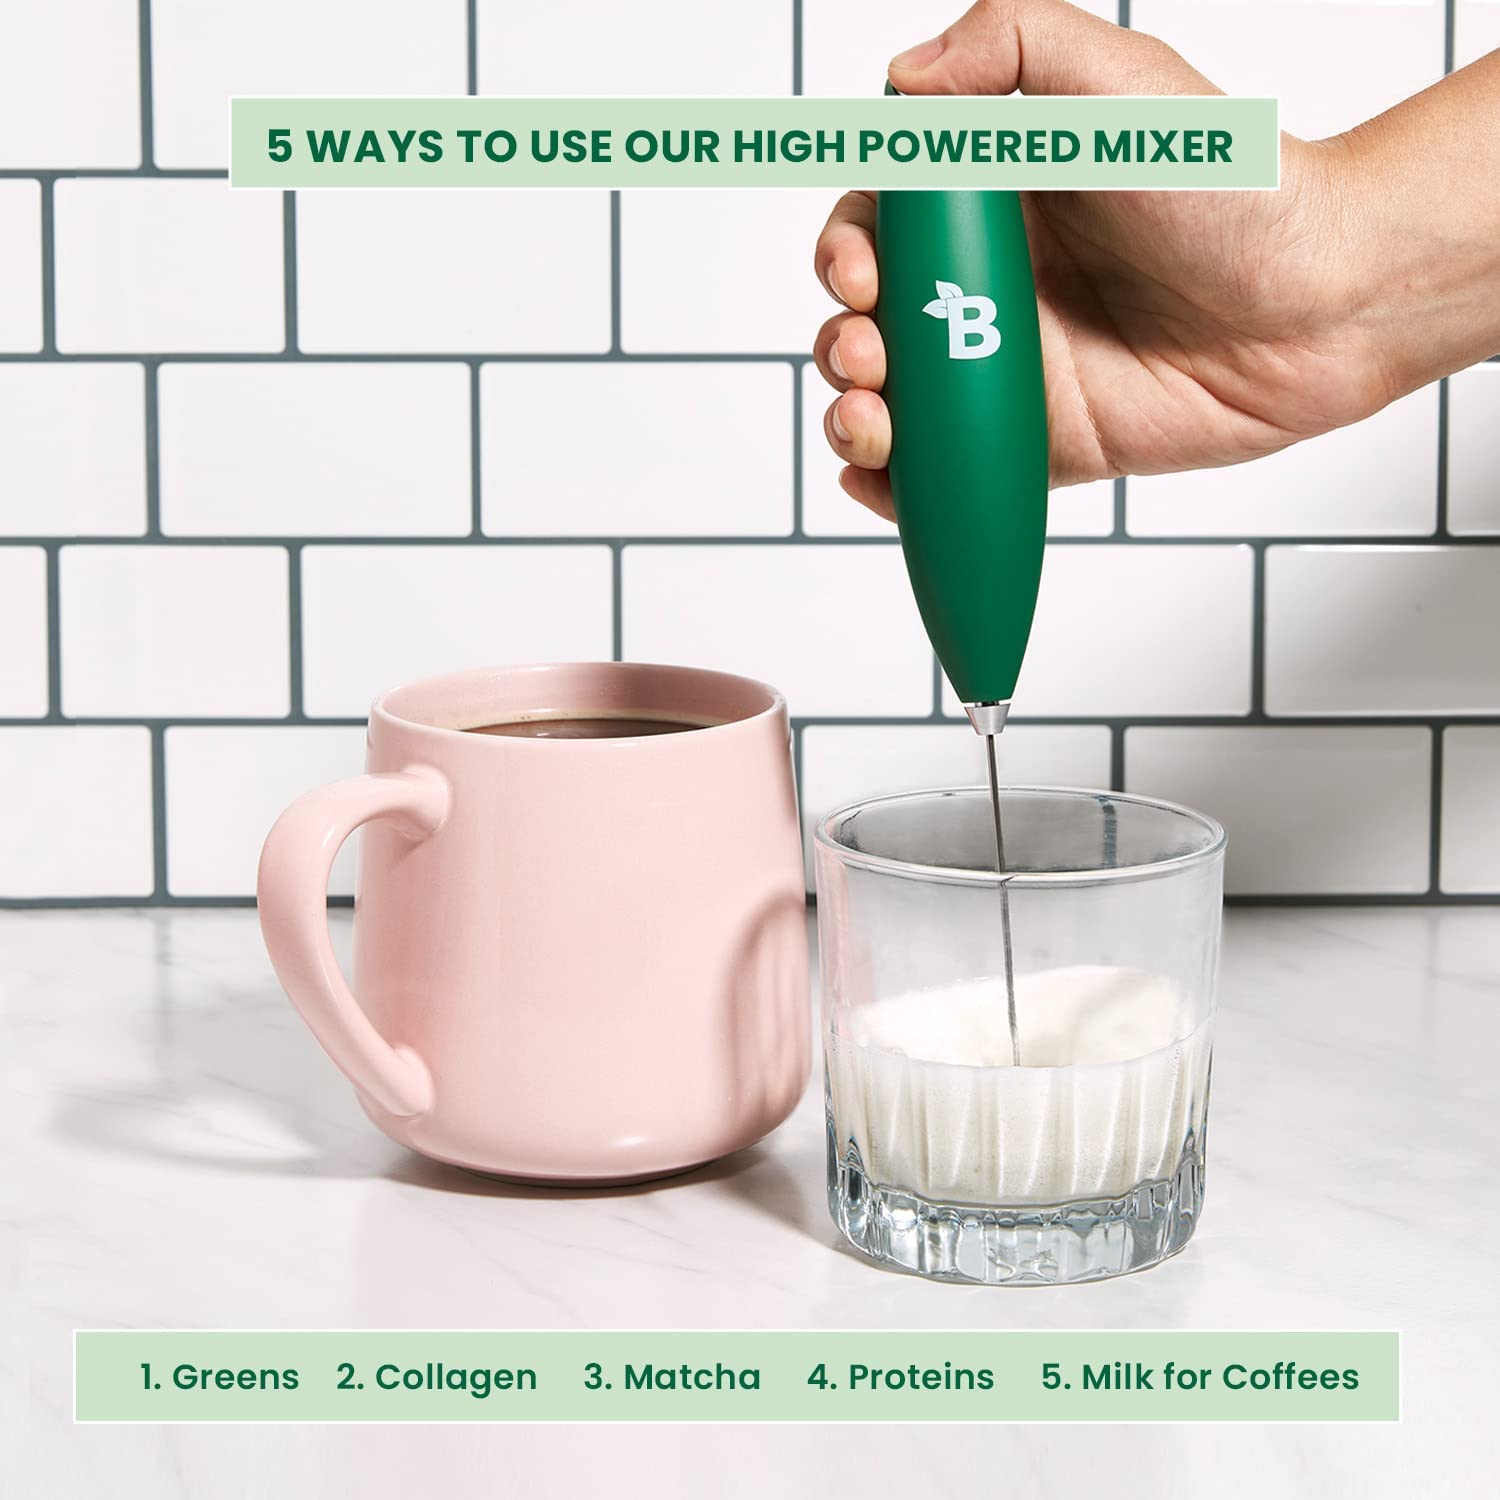 Bloom Nutrition Milk Frother High Powered Hand Mixer, Stainless Steel Electric Matcha Whisk, Handheld Mixer for Coffee, Greens, Protein & More, Battery Operated, Easy to Clean & Includes Whisk Stand